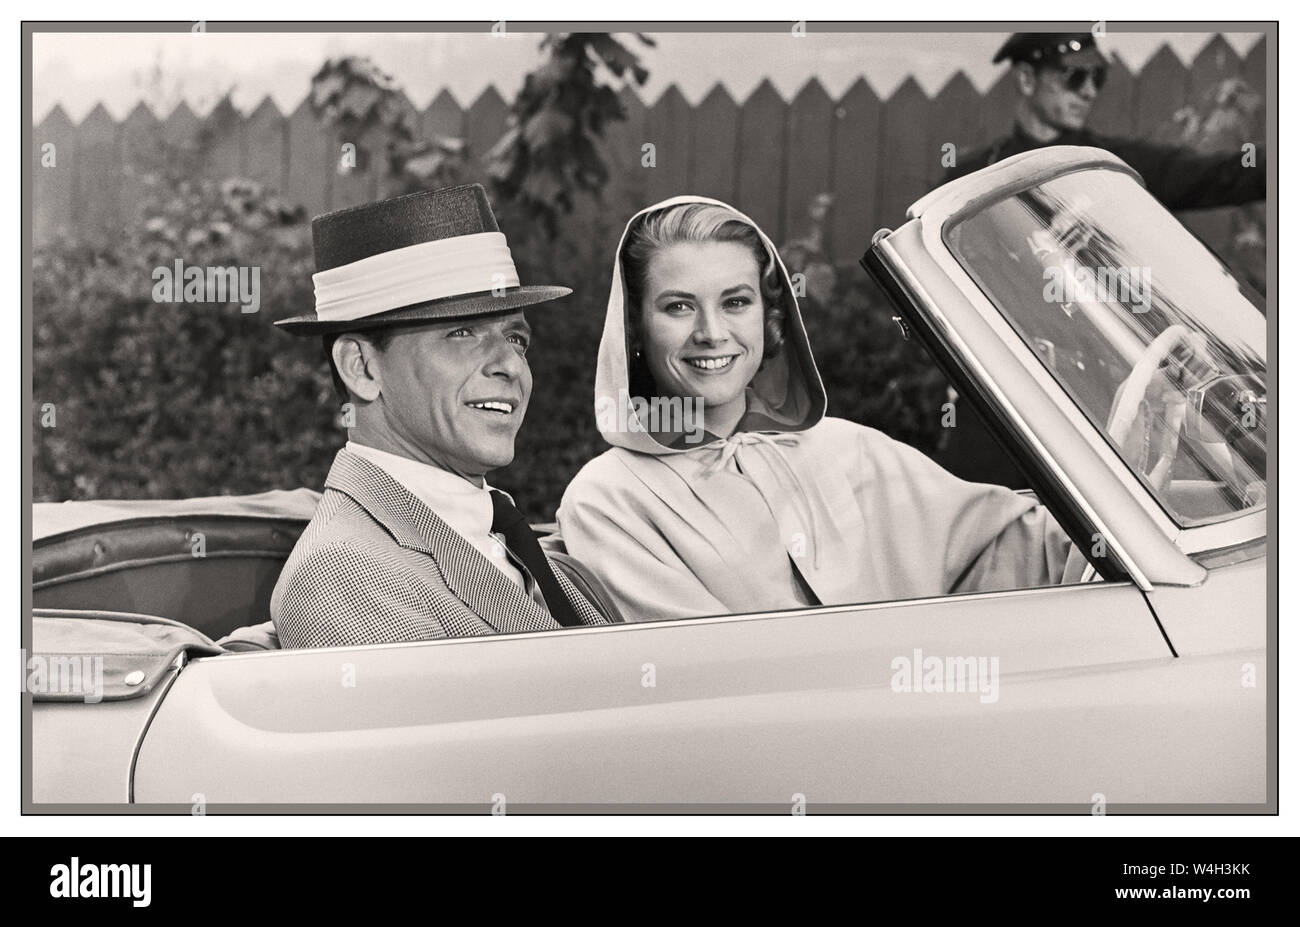 Grace Kelly and Frank Sinatra in a Mercedes open tourer 190 on film set of High Society 1956 High Society is a 1956 American romantic musical comedy film directed by Charles Walters and starring Bing Crosby, Grace Kelly, and Frank Sinatra. The film was produced by Sol C. Siegel for Metro-Goldwyn-Mayer, and shot in VistaVision and Technicolor, with music and lyrics by Cole Porter. High Society was the last film appearance of Grace Kelly, before she became Princess consort of Monaco. Stock Photo